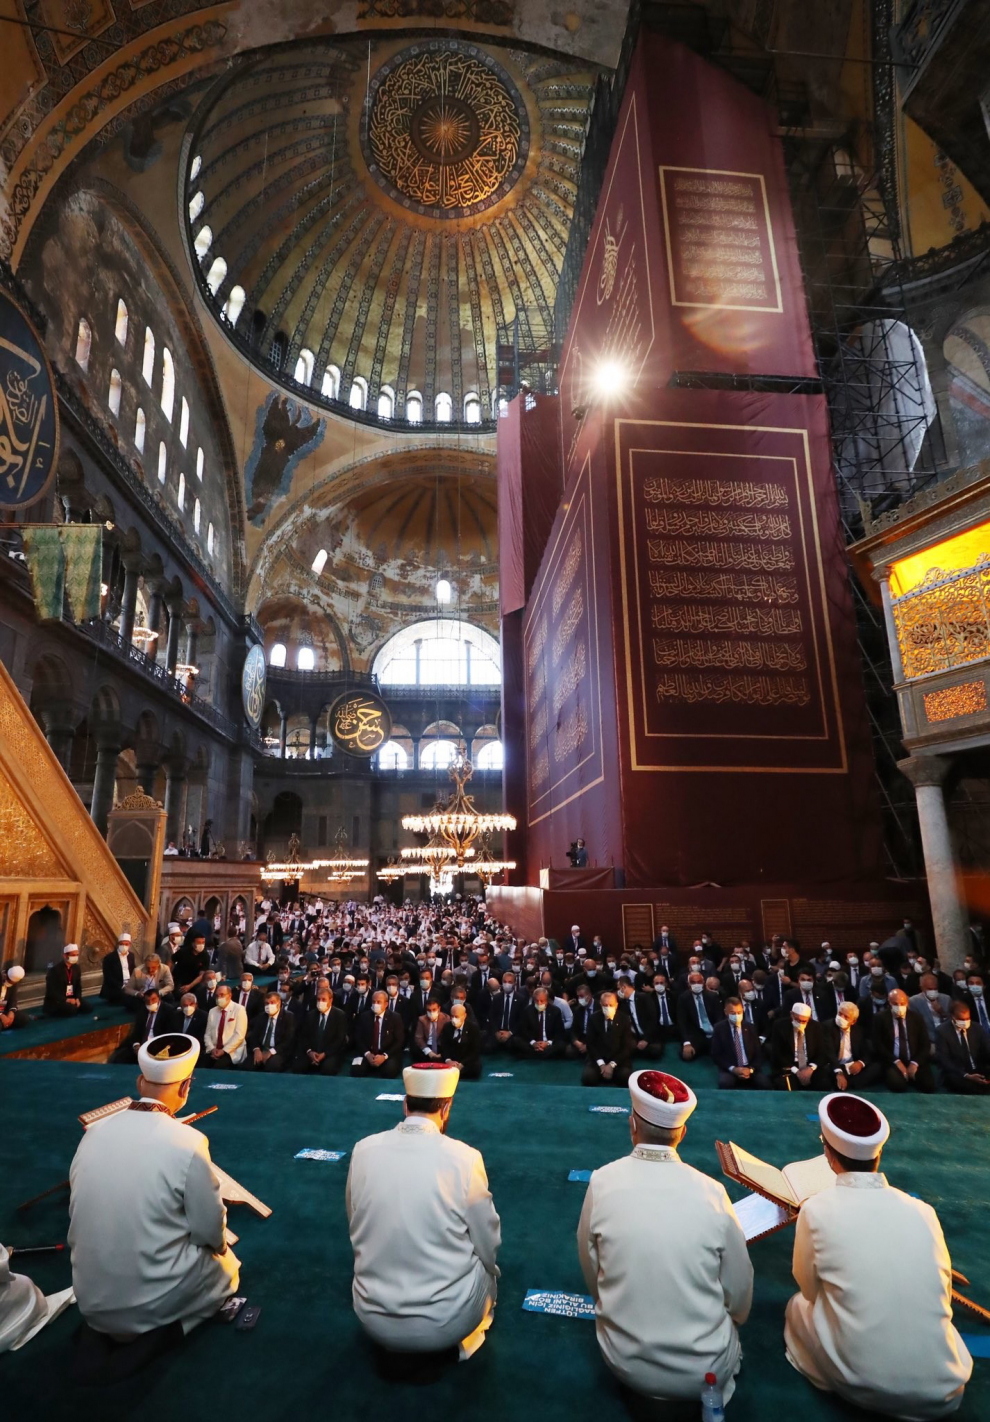 HANDOUT - 24 July 2020, Turkey, Istanbul: Turkish President Recep Tayyip Erdogan performs Friday prayer at the Hagia Sophia Grand Mosque, which reopened for worship after an 86-year as a museum. Photo: -/Turkish Presidency/dpa - ATTENTION: editorial use only and only if the credit mentioned above is referenced in full24/07/2020 ONLY FOR USE IN SPAIN [[[EP]]] HANDOUT - 24 July 2020, Turkey, Istanbul: Turkish President Recep Tayyip Erdogan performs Friday prayer at the Hagia Sophia Grand Mosque, which reopened for worship after an 86-year as a museum. Photo: -/Turkish Presidency/dpa - ATTENTION: editorial use o